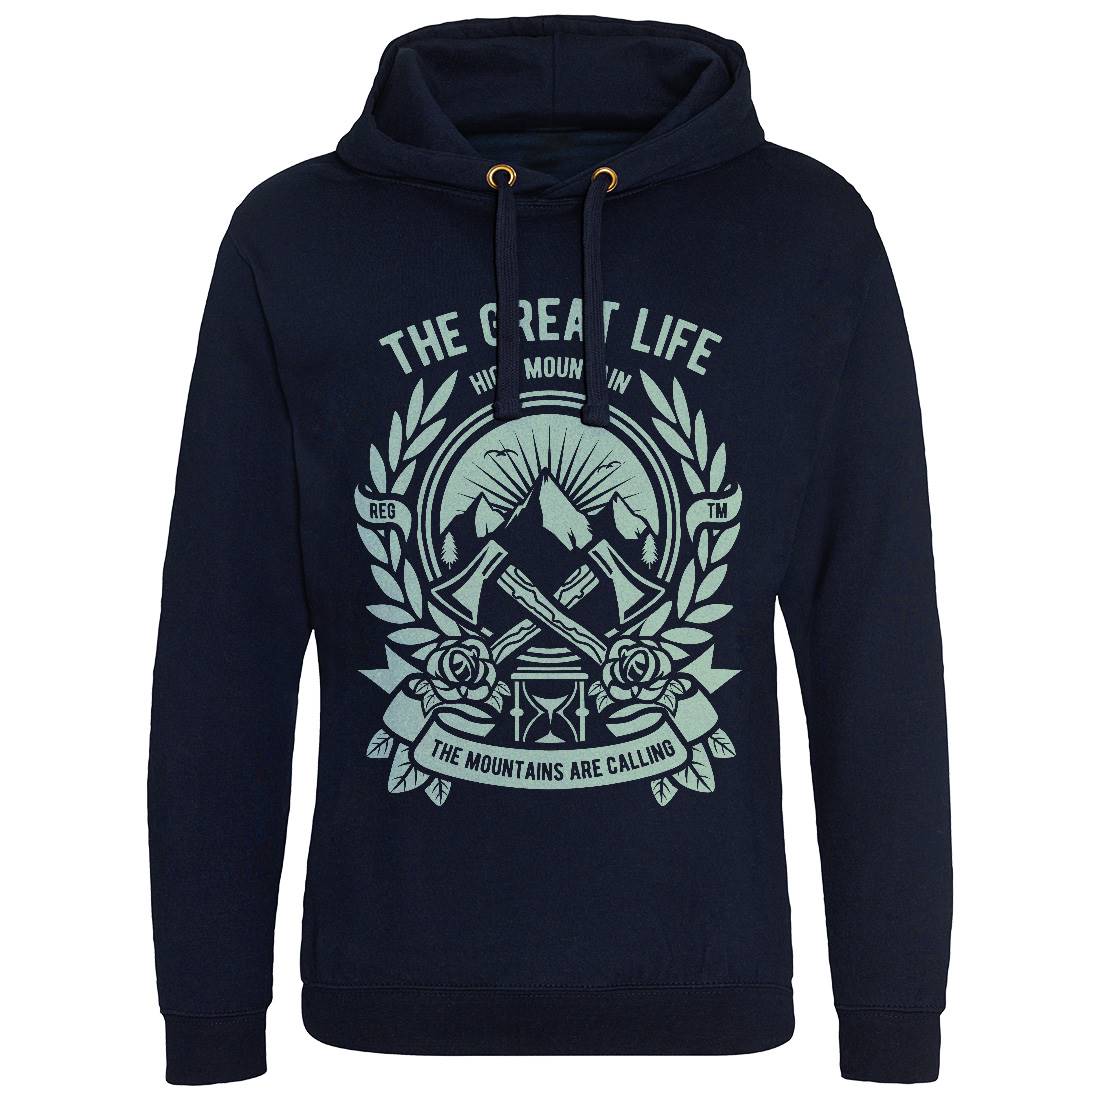 Axe Mens Hoodie Without Pocket Work A008